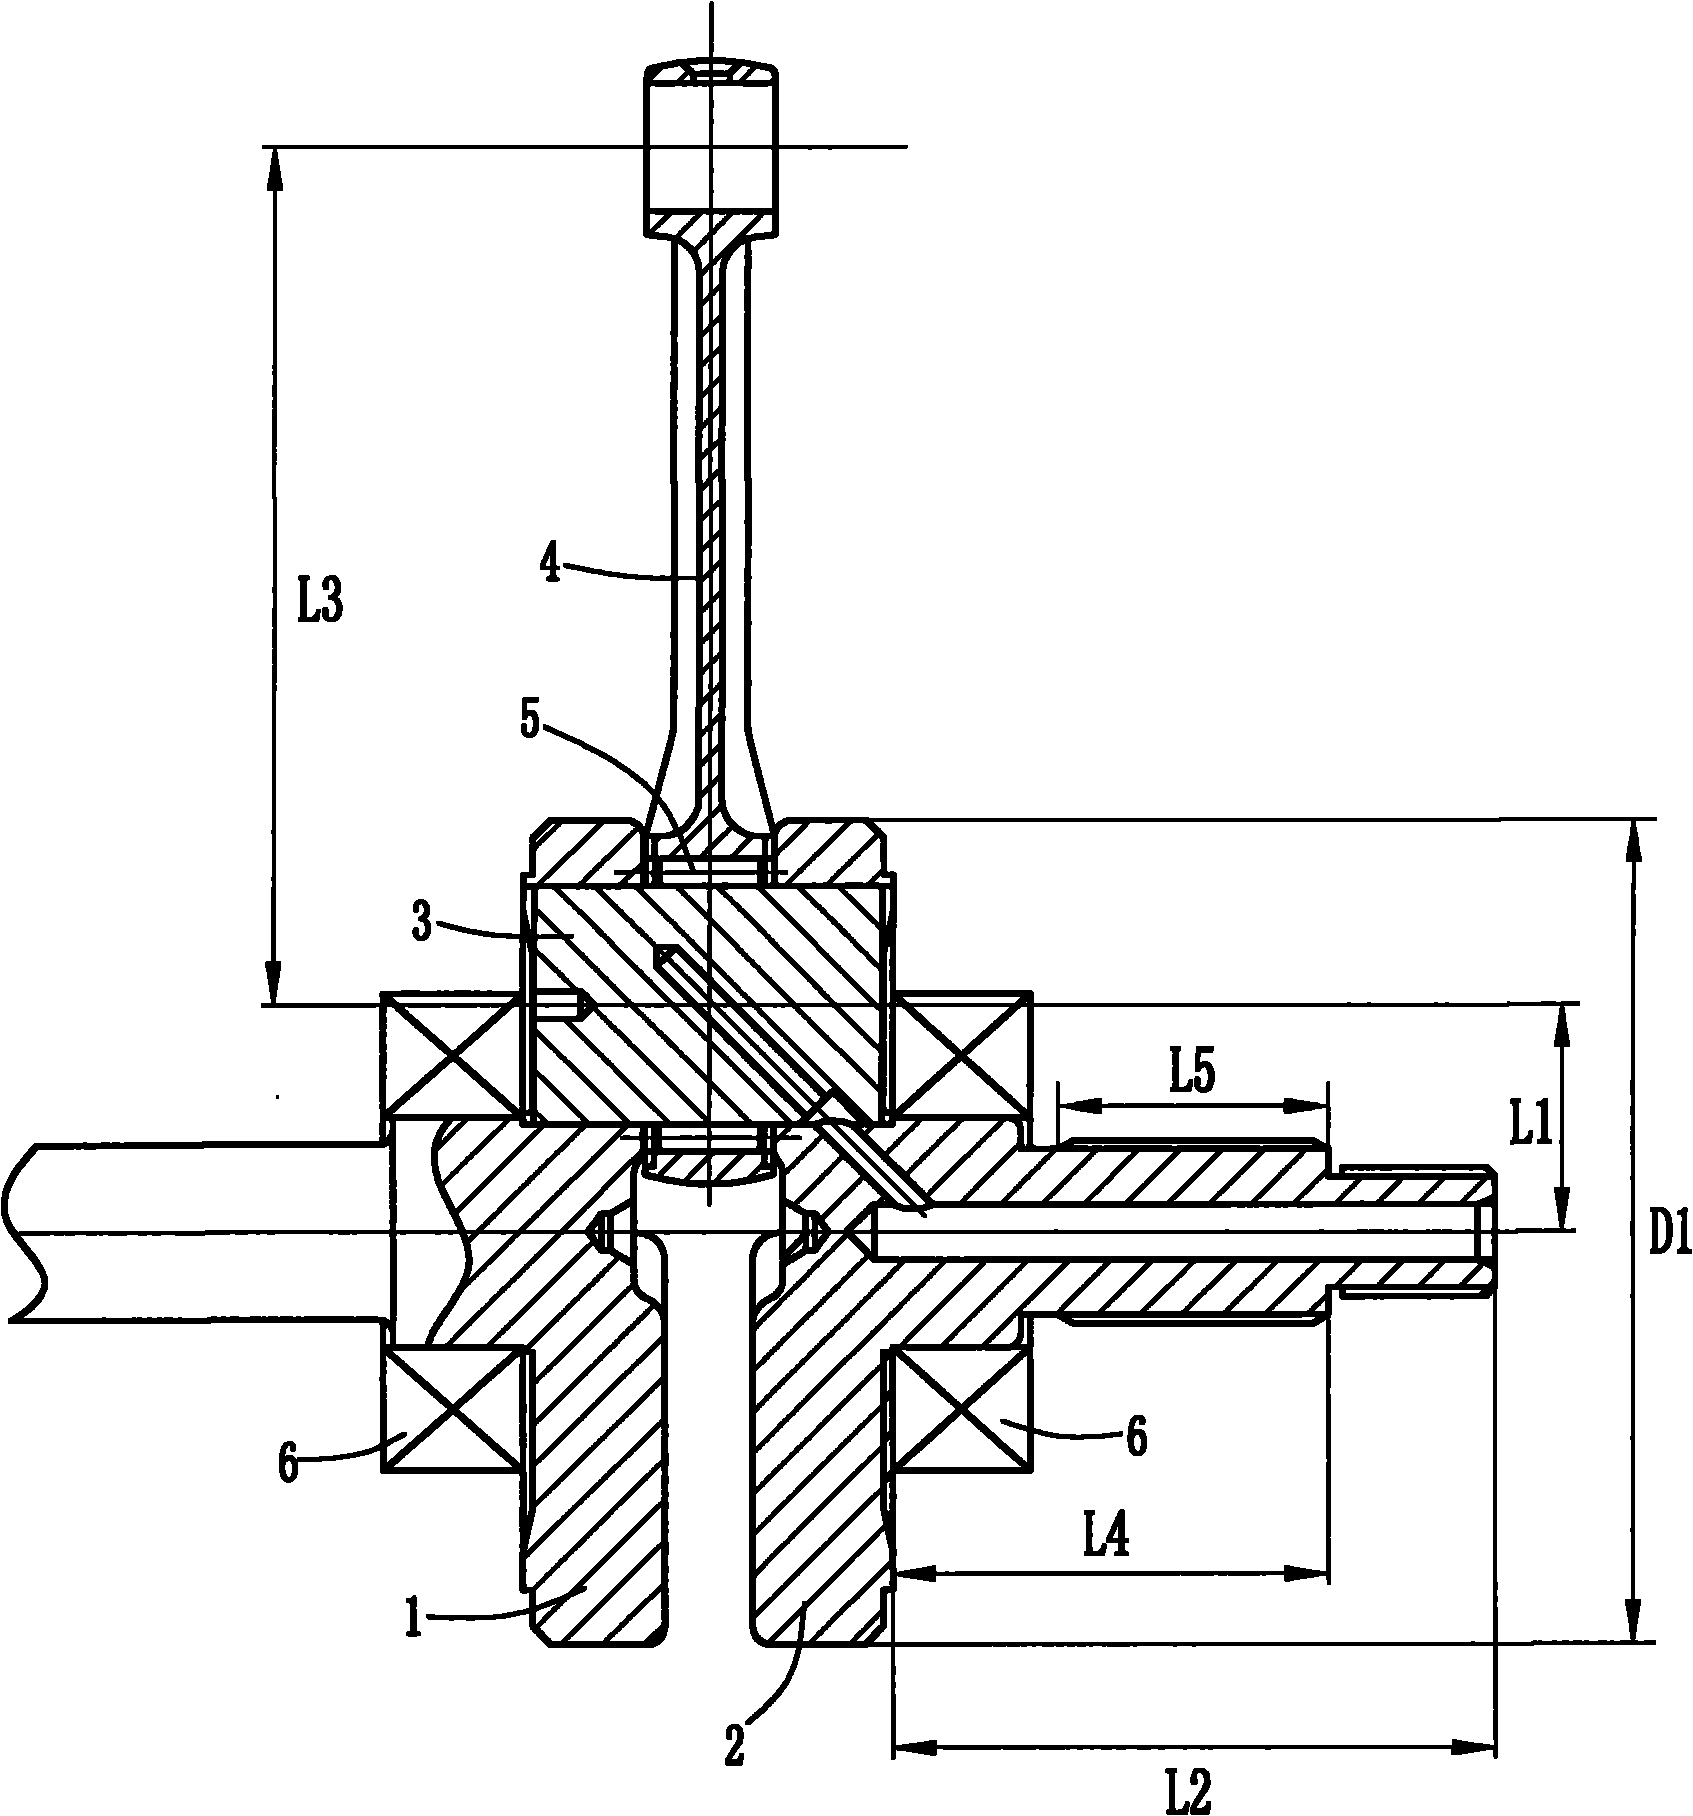 Crank-connecting rod mechanism for engine of miniature cross-country motorcycle